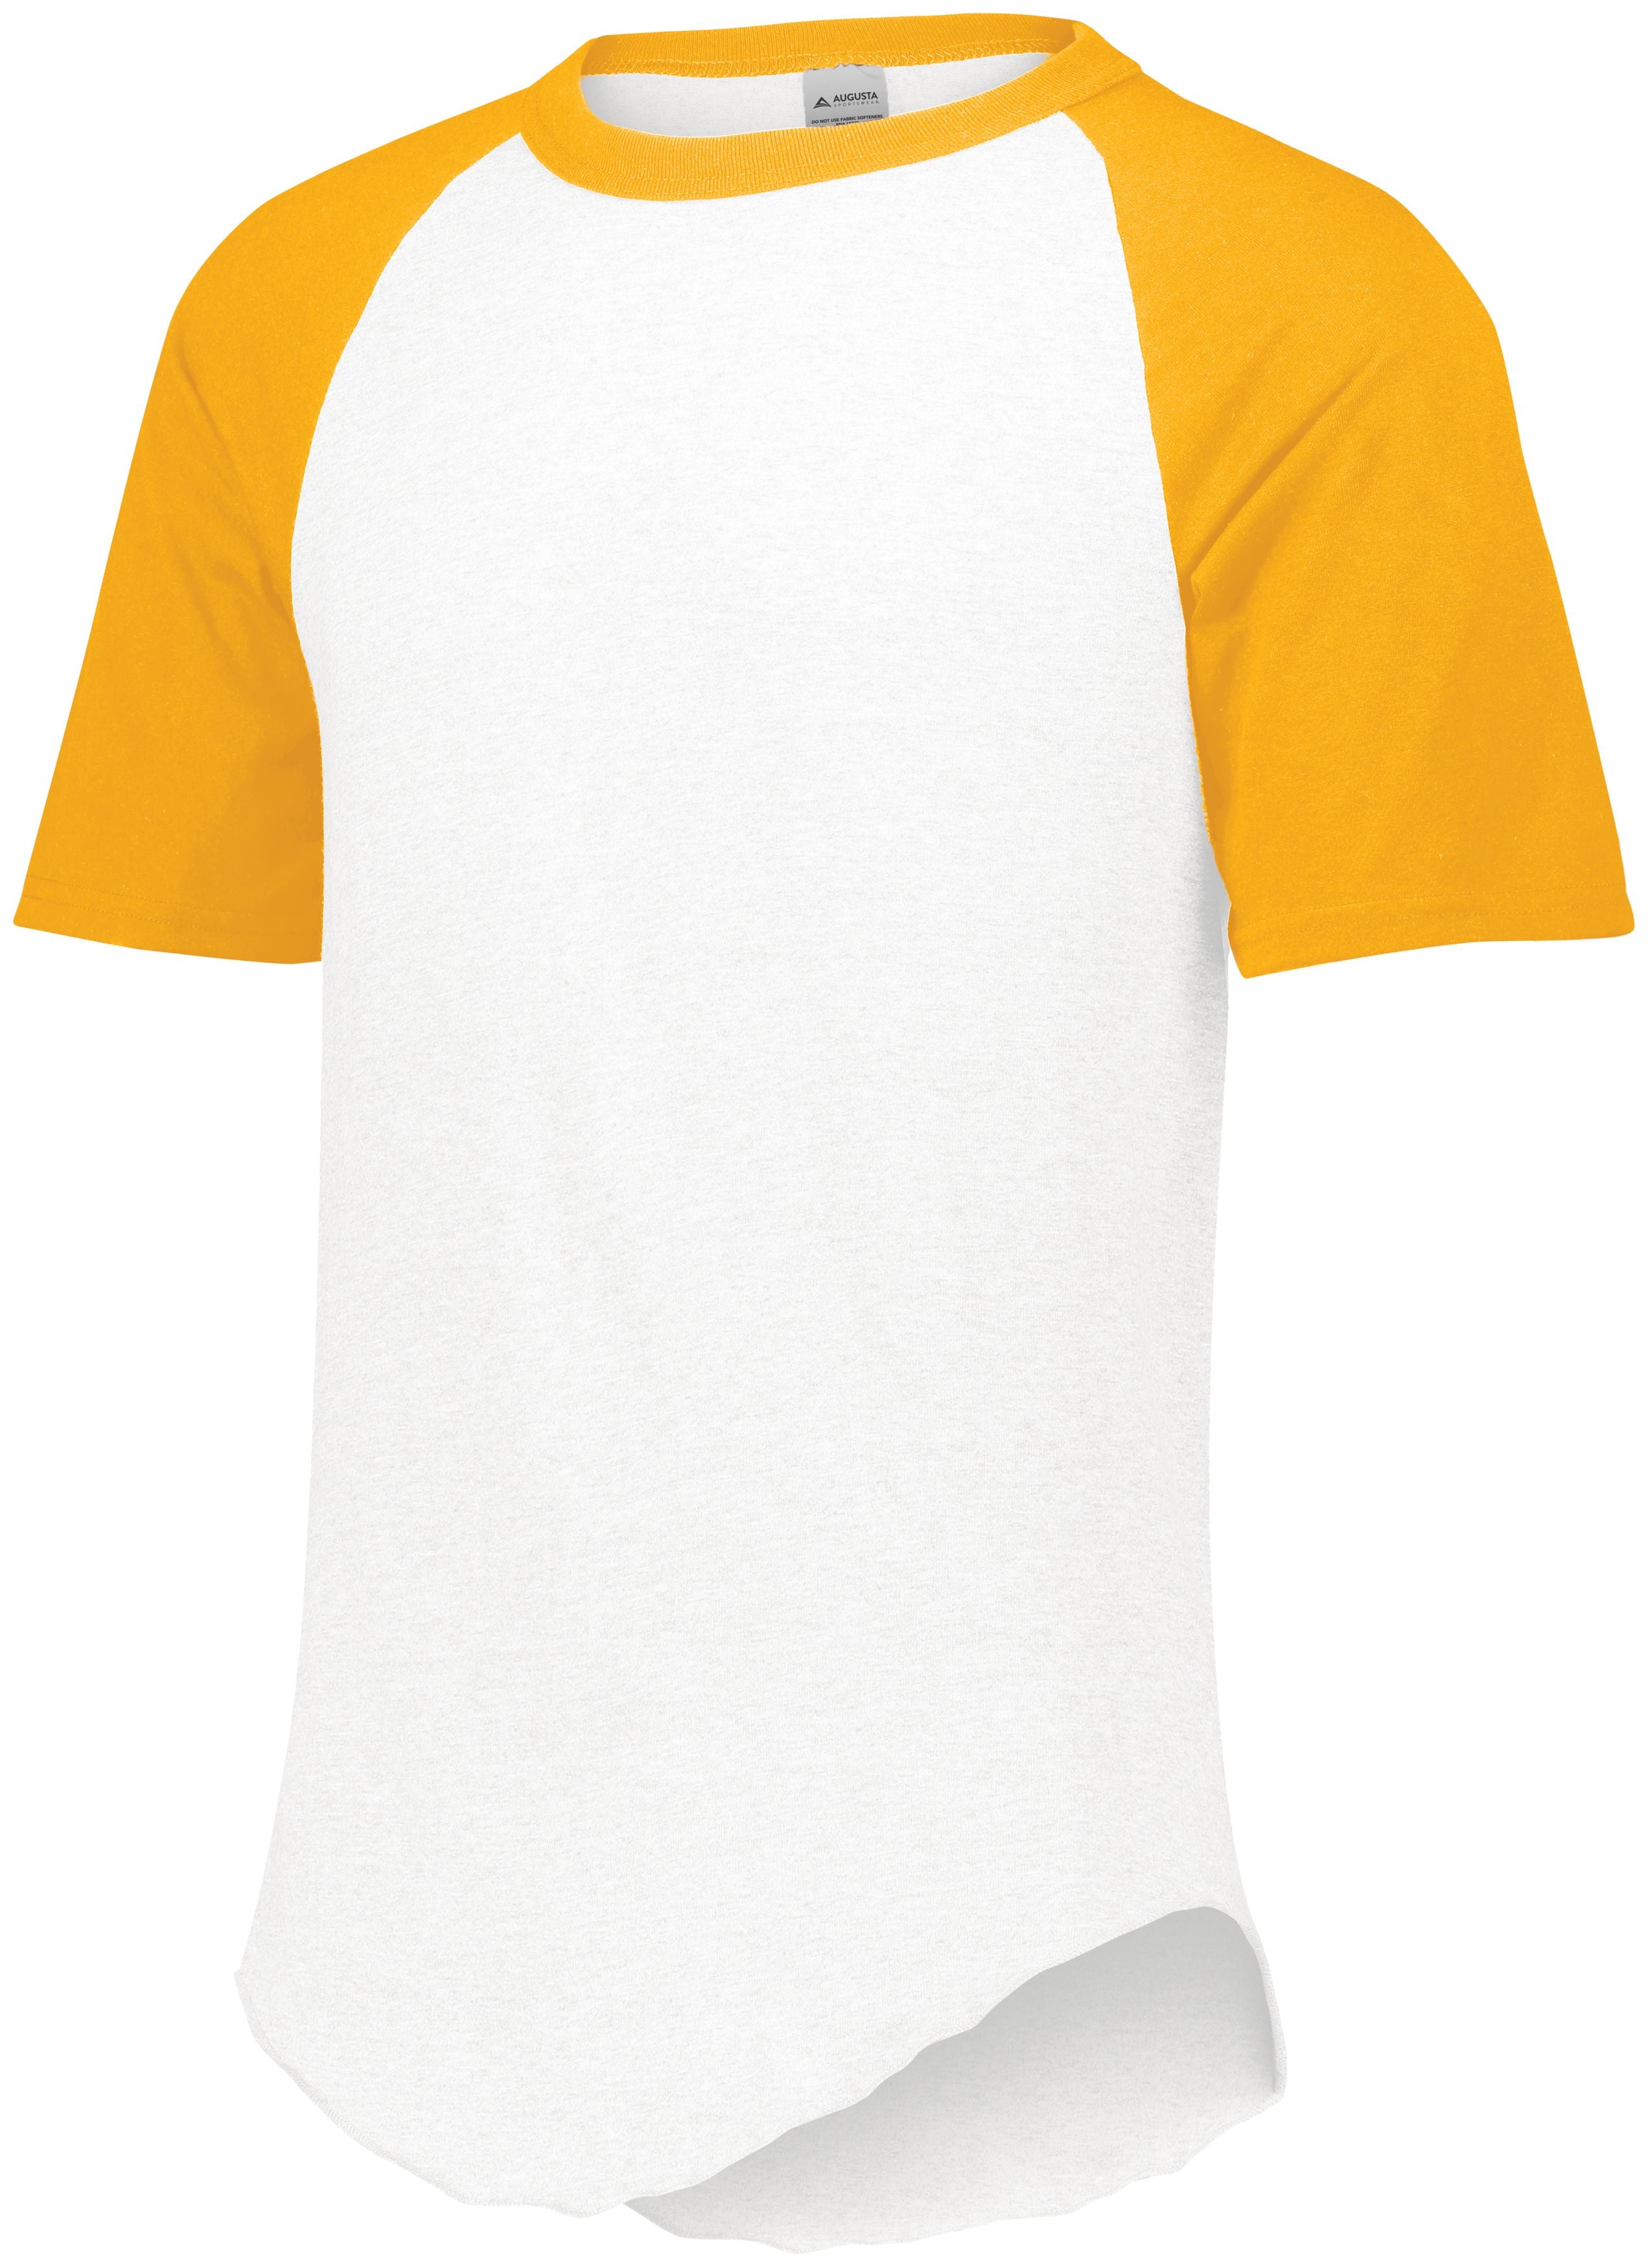 Augusta Sportswear Short Sleeve Baseball Jersey in White/Gold  -Part of the Adult, Adult-Jersey, Augusta-Products, Baseball, Shirts, All-Sports, All-Sports-1 product lines at KanaleyCreations.com